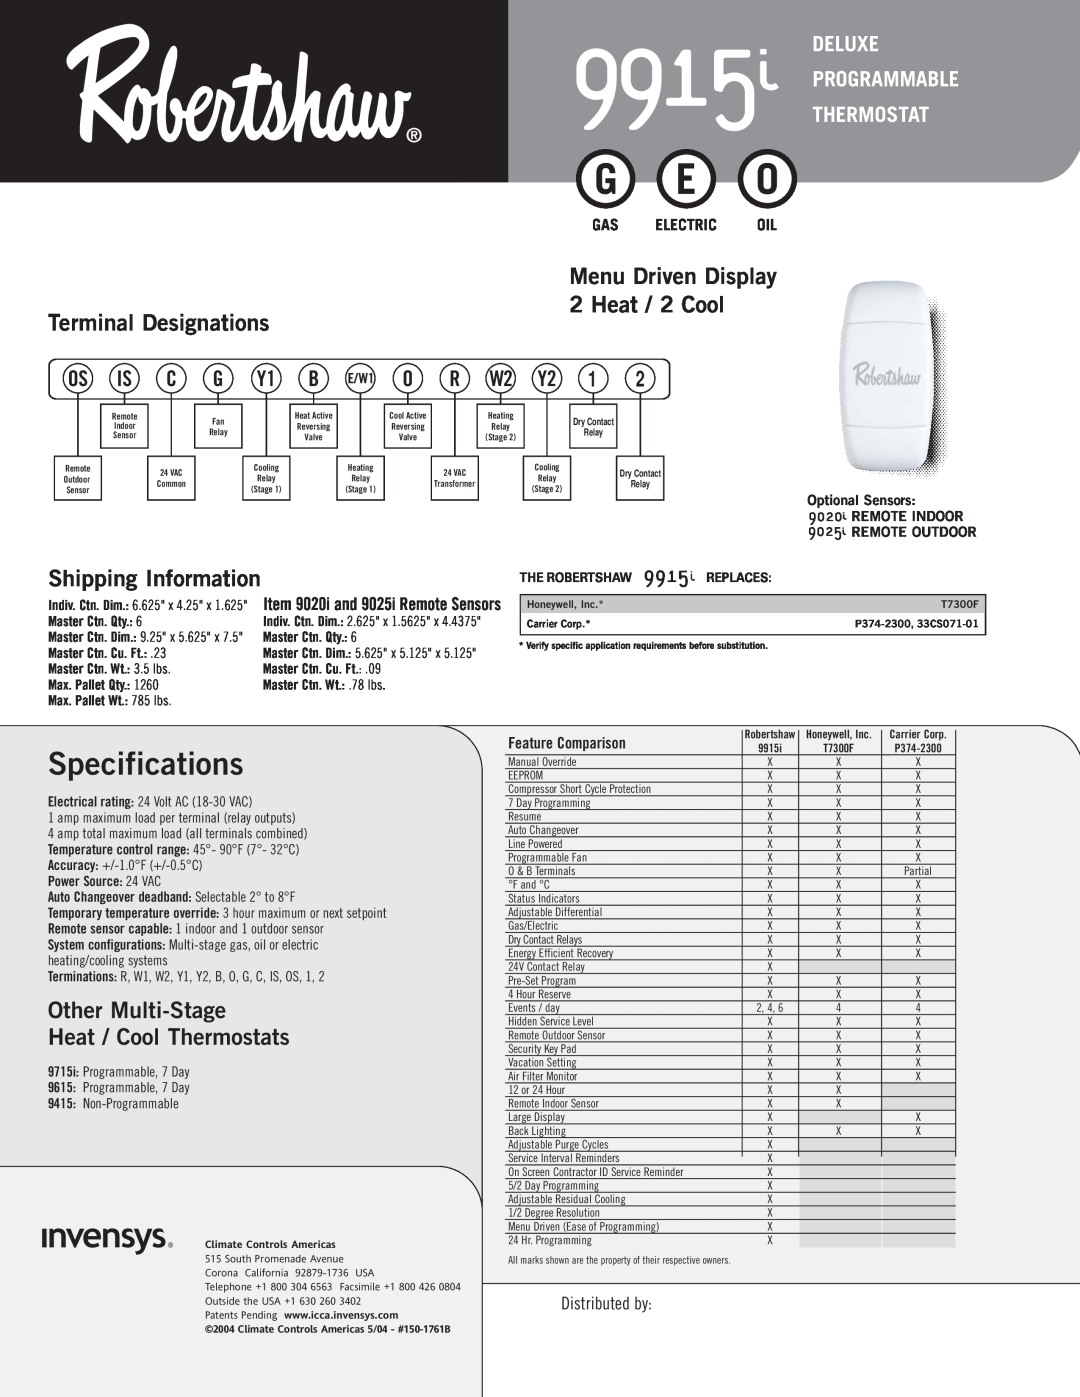 NewAir 9915i Specifications, Terminal Designations, Shipping Information, Other Multi-Stage Heat / Cool Thermostats, Os Is 